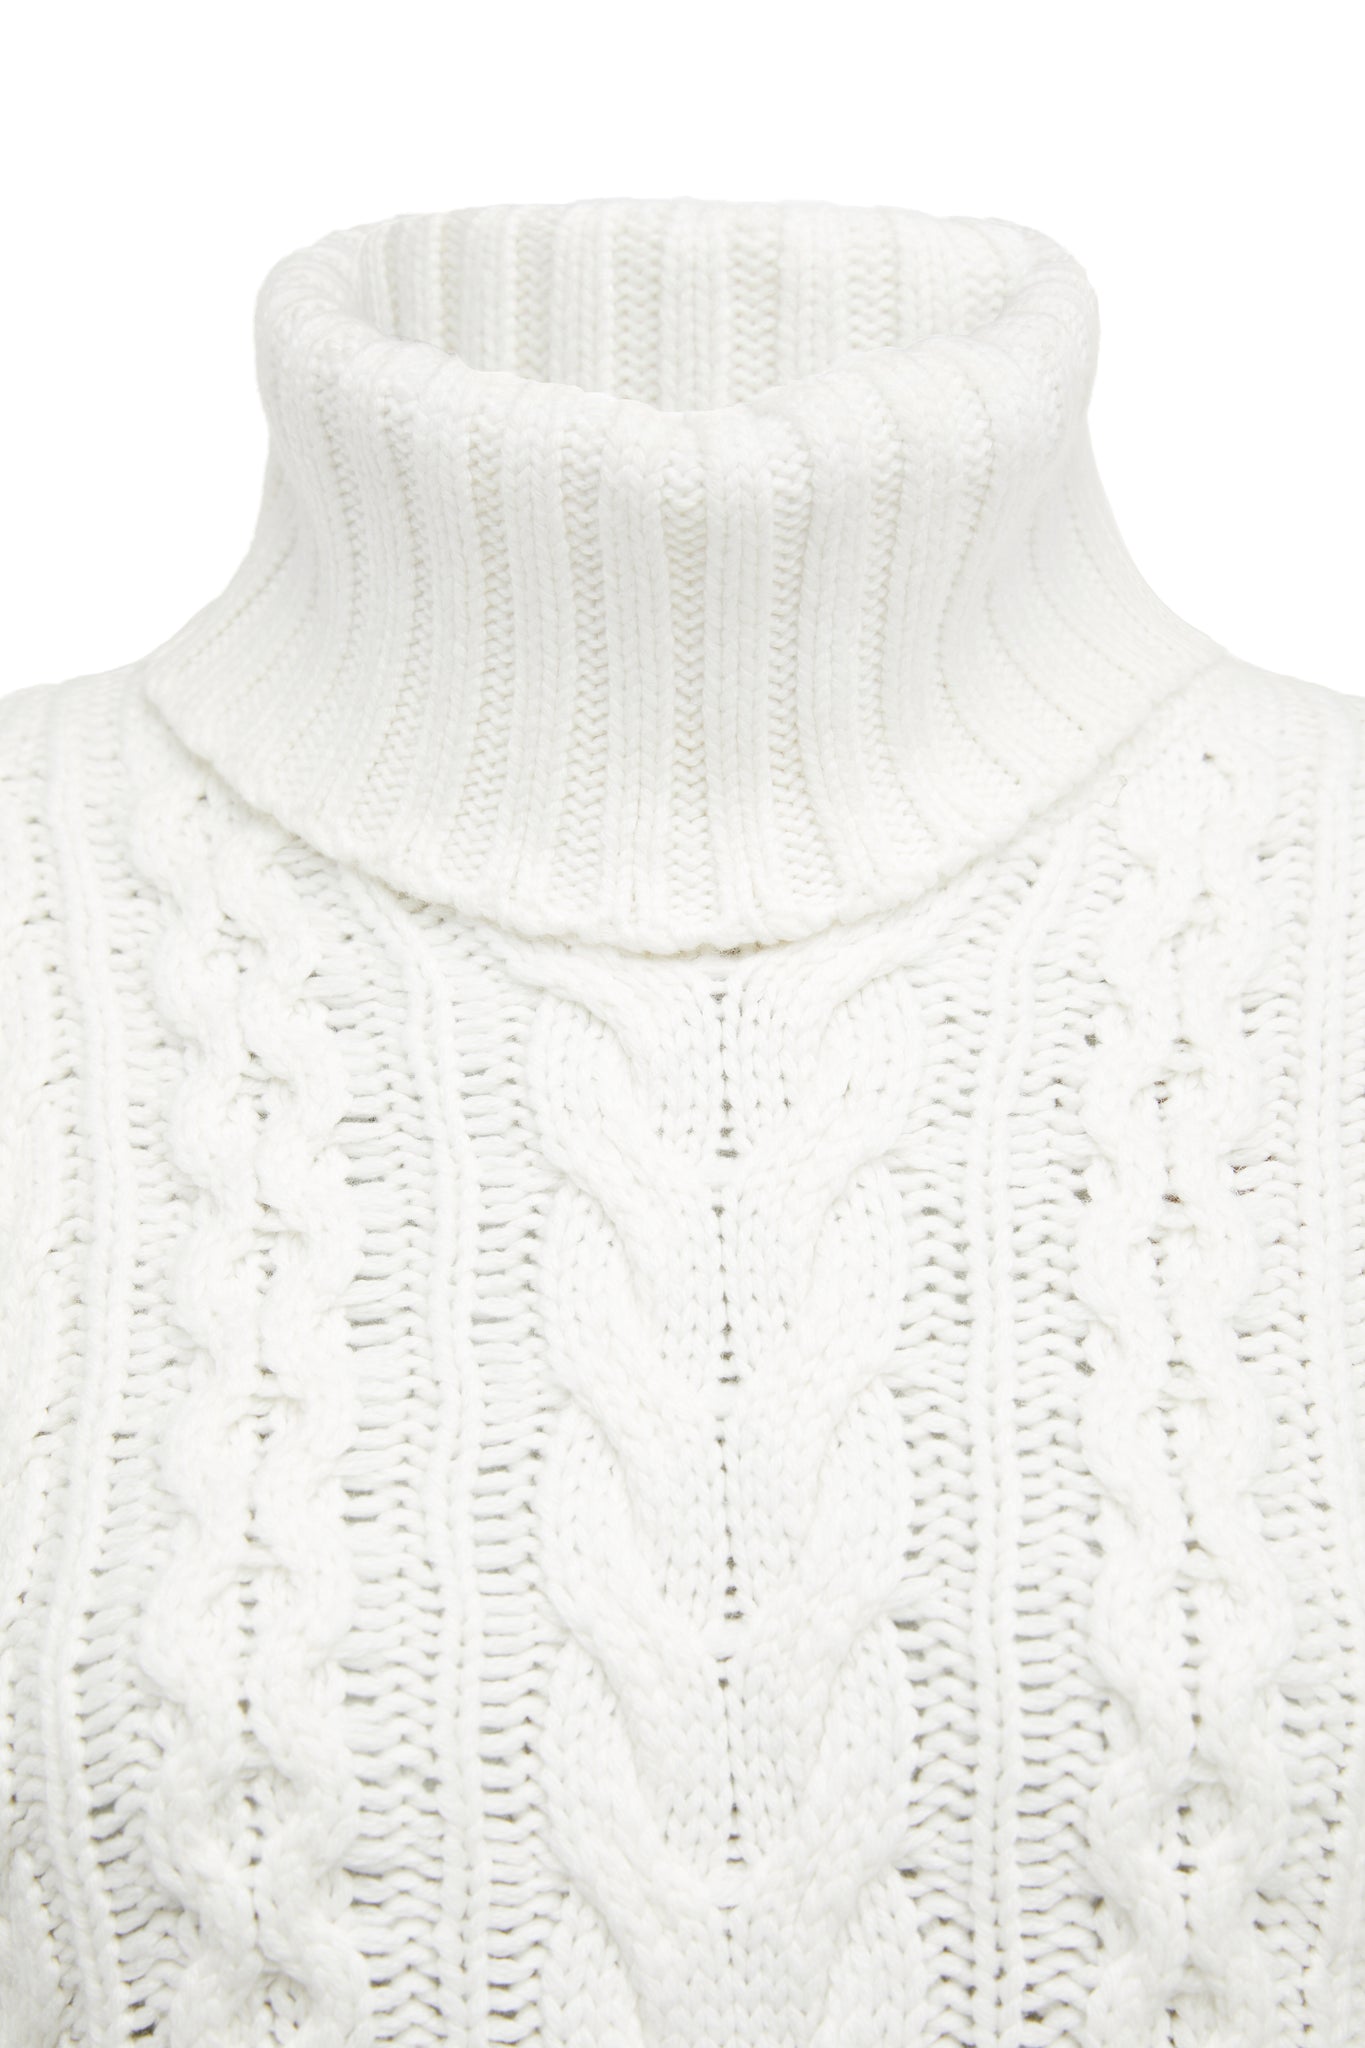 Roll neck detail of sleeveless white chunky knit cable jumper with ties at each side 